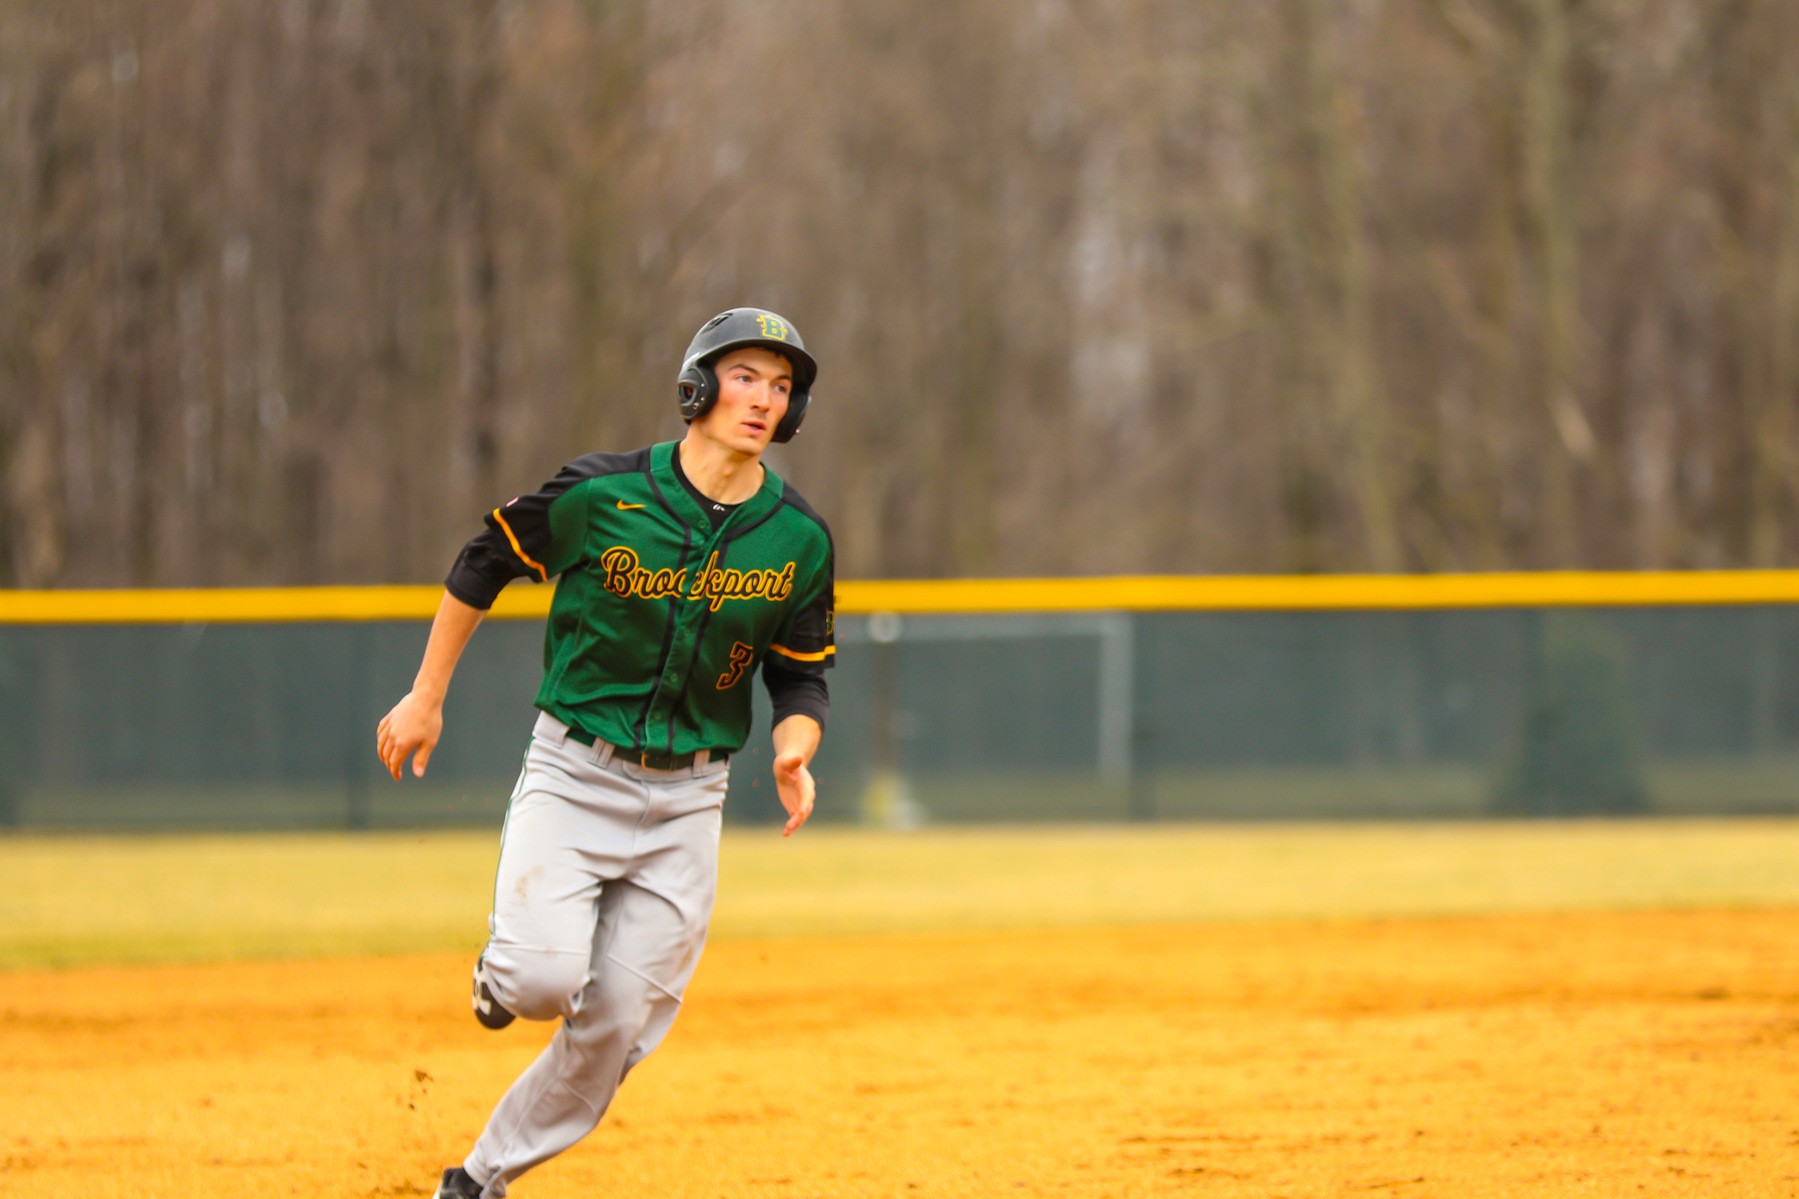 Game of the Week: Walk-Off Home Run gives Brockport the win over Plattsburgh